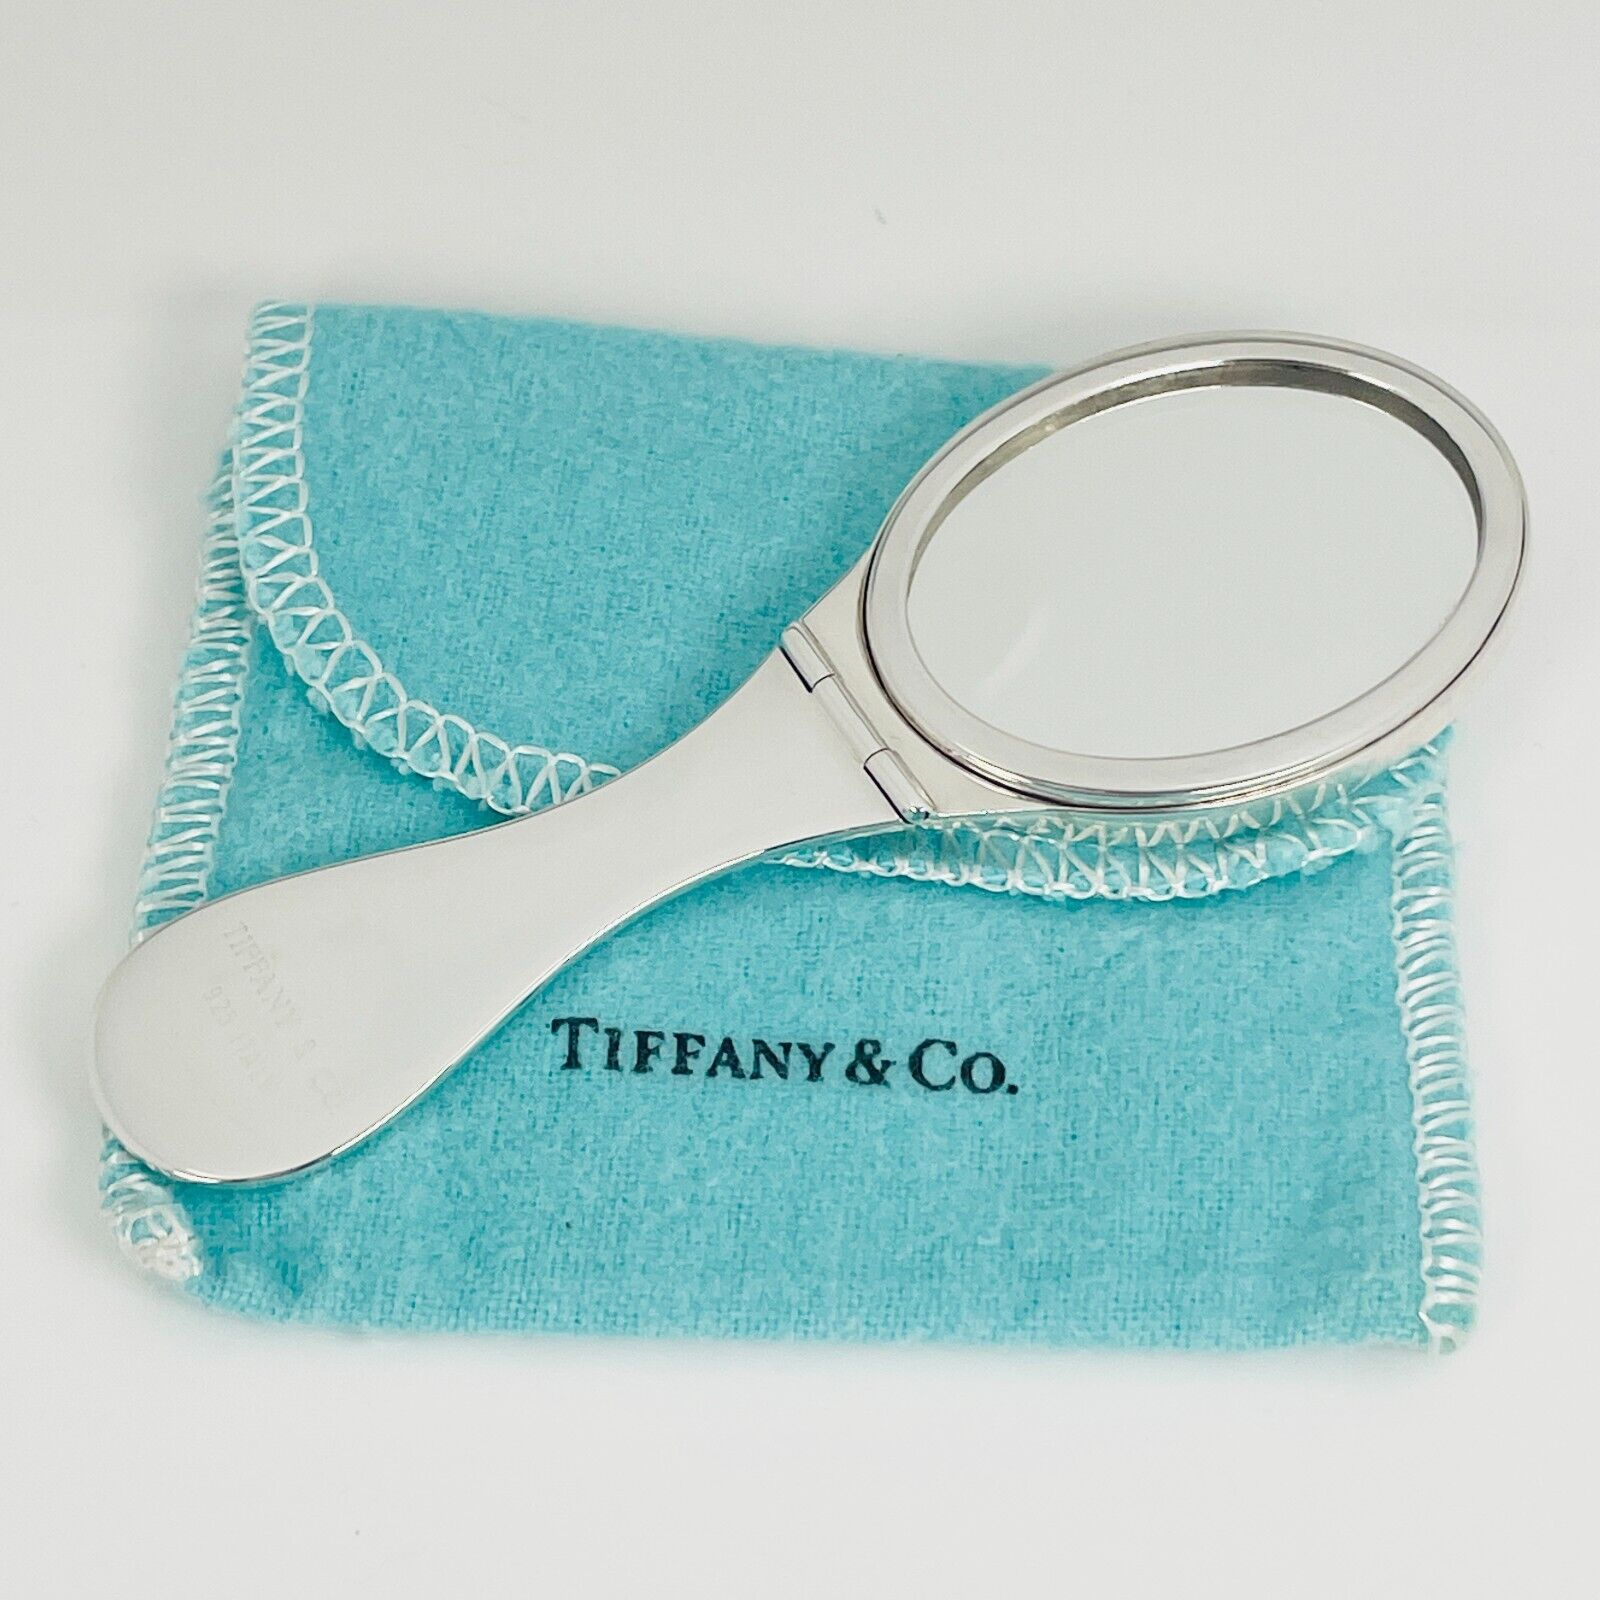 Vintage Tiffany & Co Makeup Cosmetic Folding Purse Mirror Compact in Silver